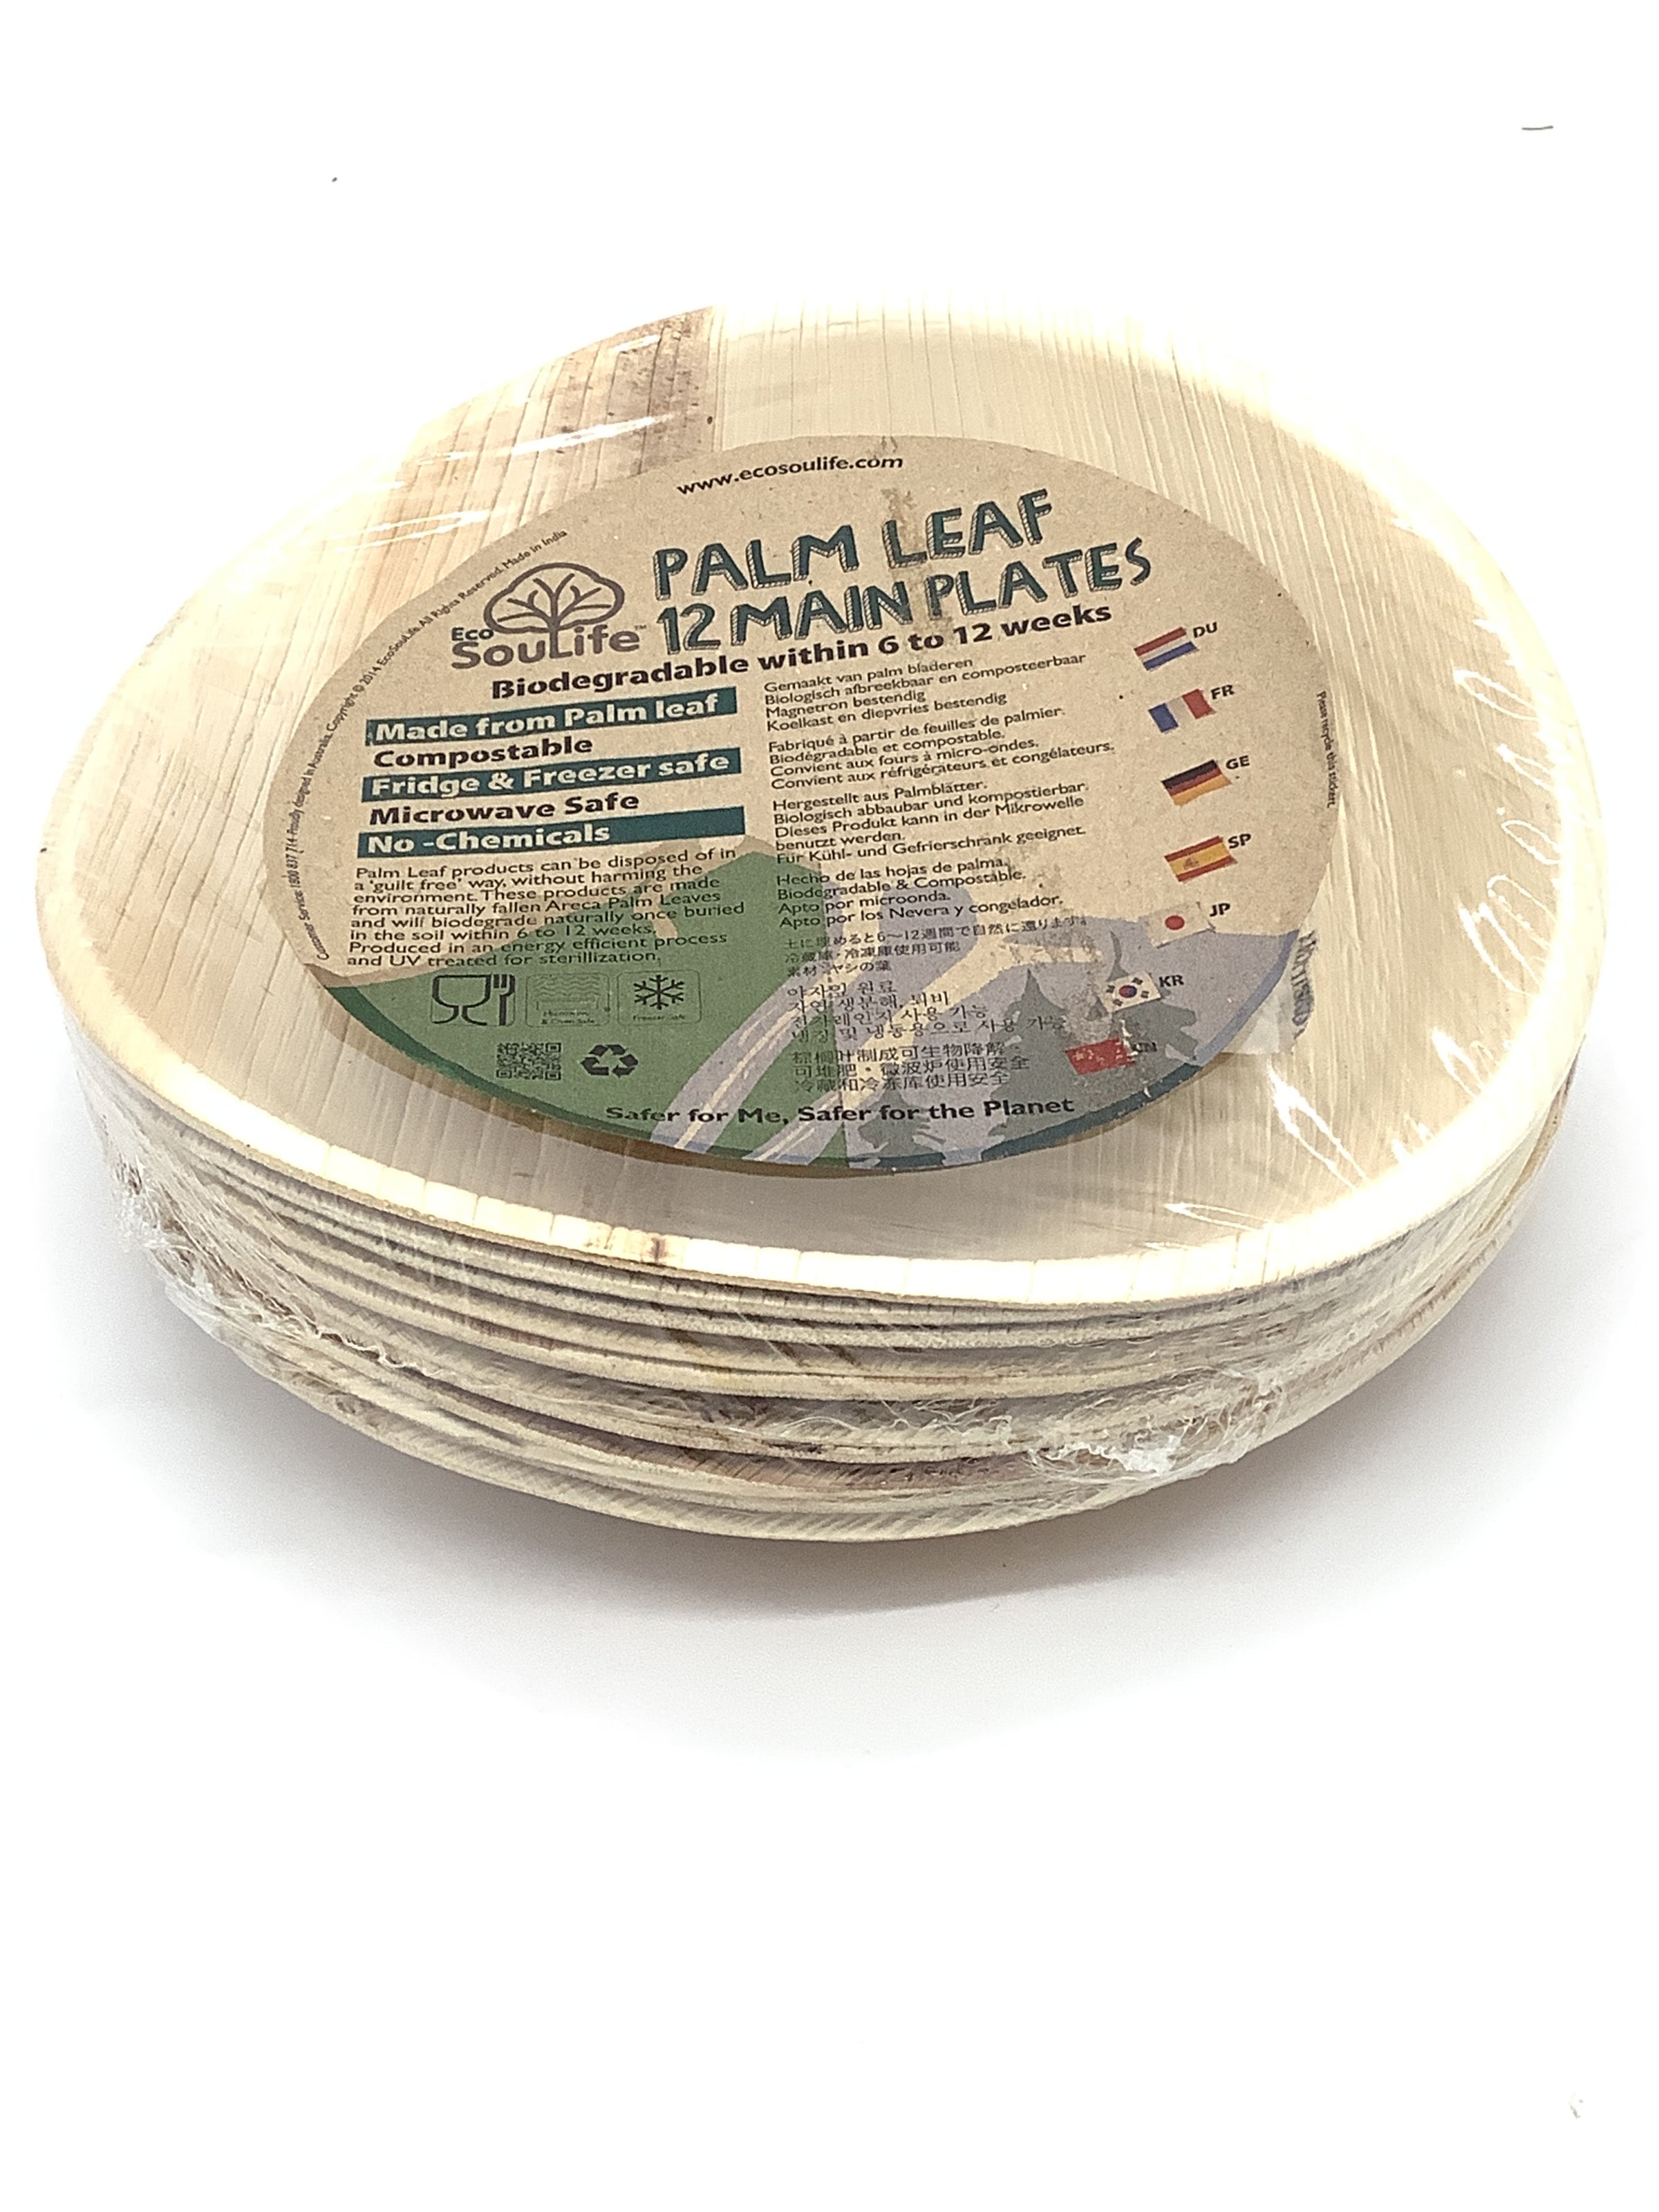 12 Biodegradable Disposable Plates - Made in India